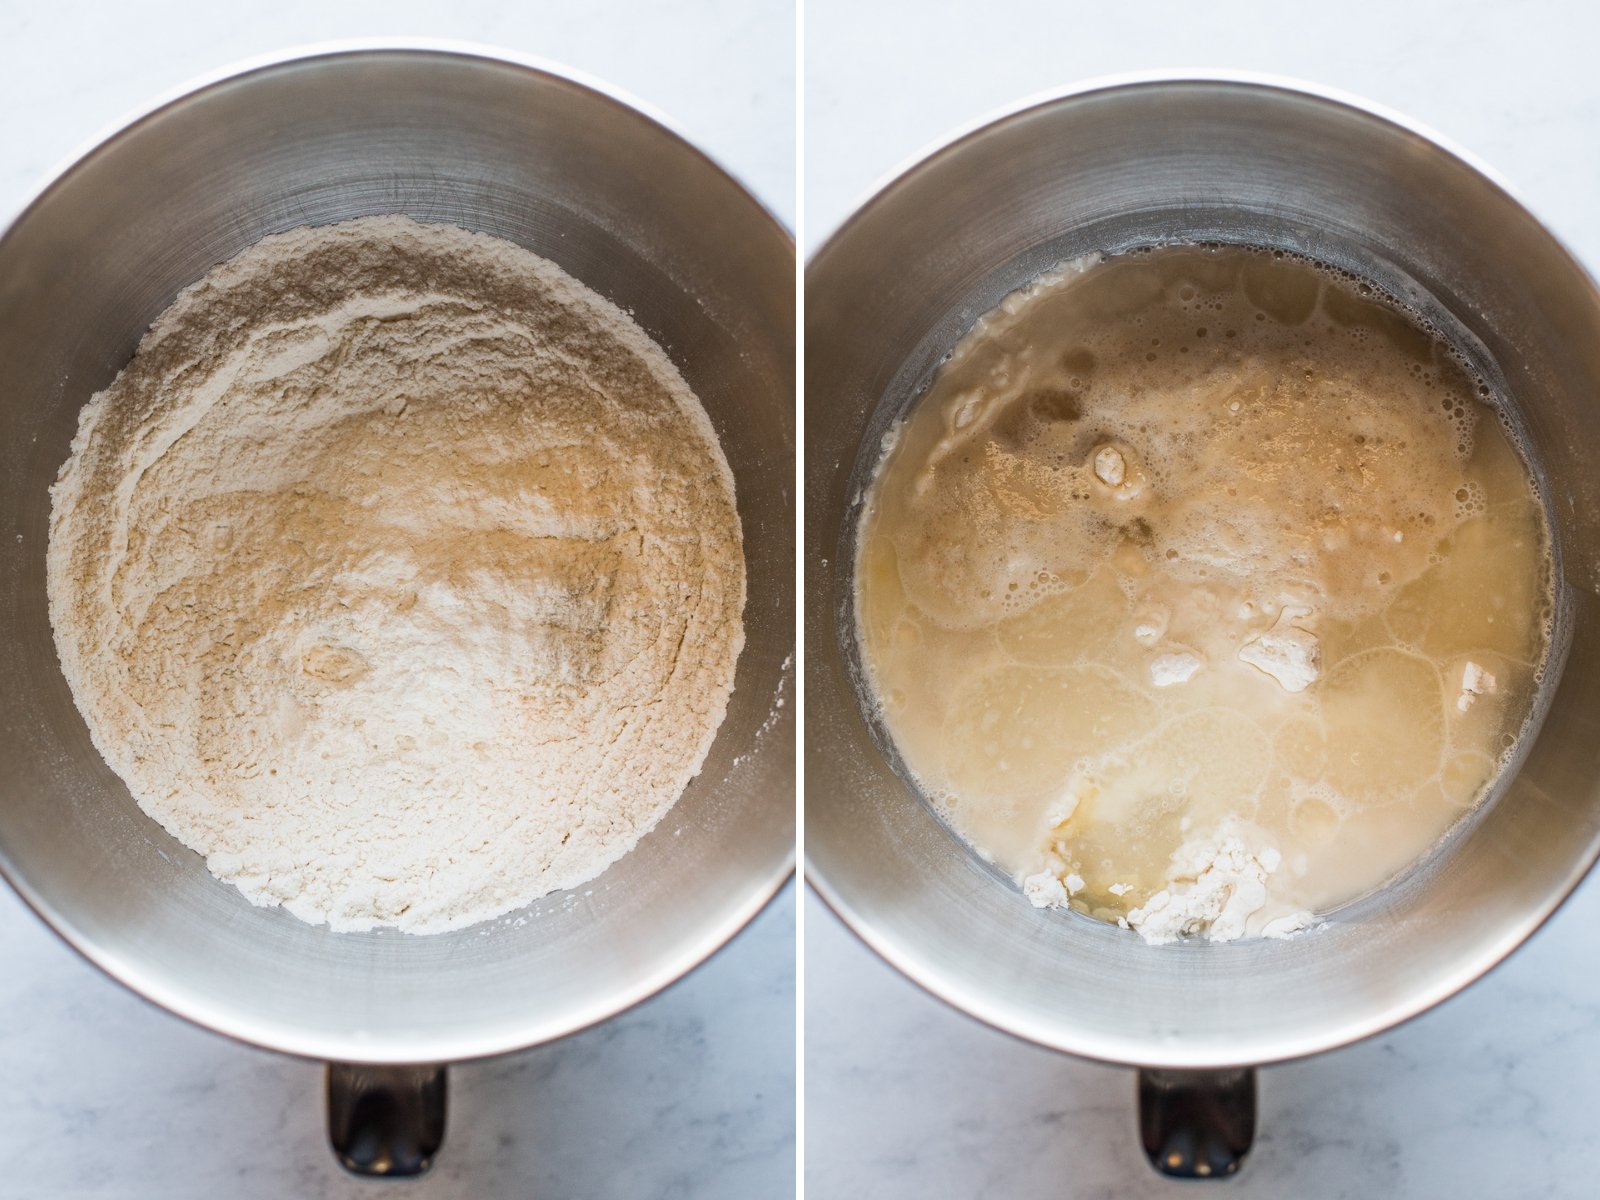 Flour, salt, yeast, sugar, and water in the bowl of a stand mixer for bolillo bread.